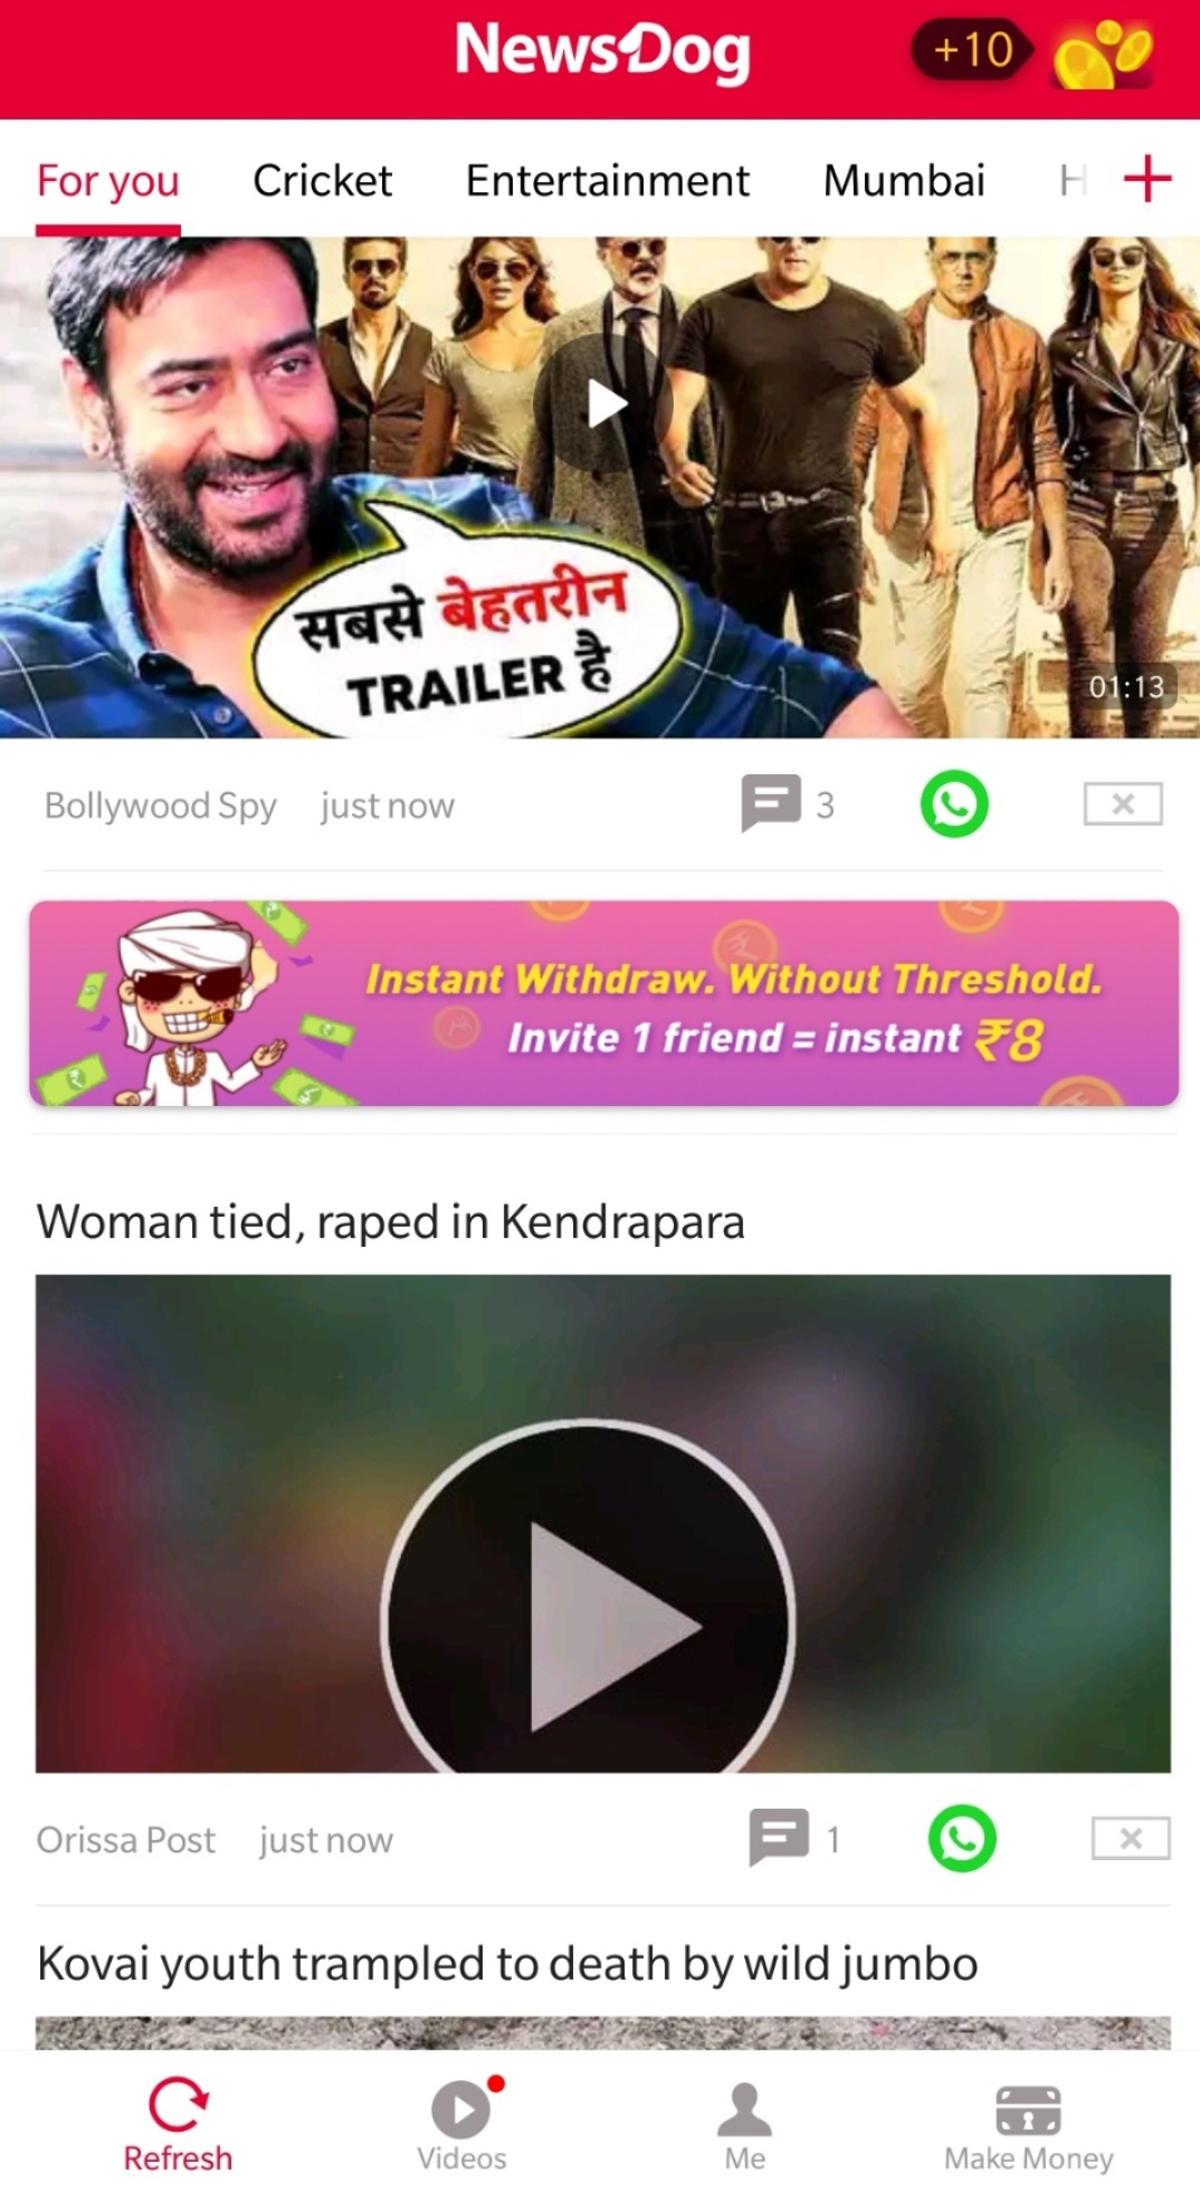 A clean-up seems to be underway at NewsDog: The "Woman tied, raped in Kendrapara" video was removed from the app days after FactorDaily spotted it last week